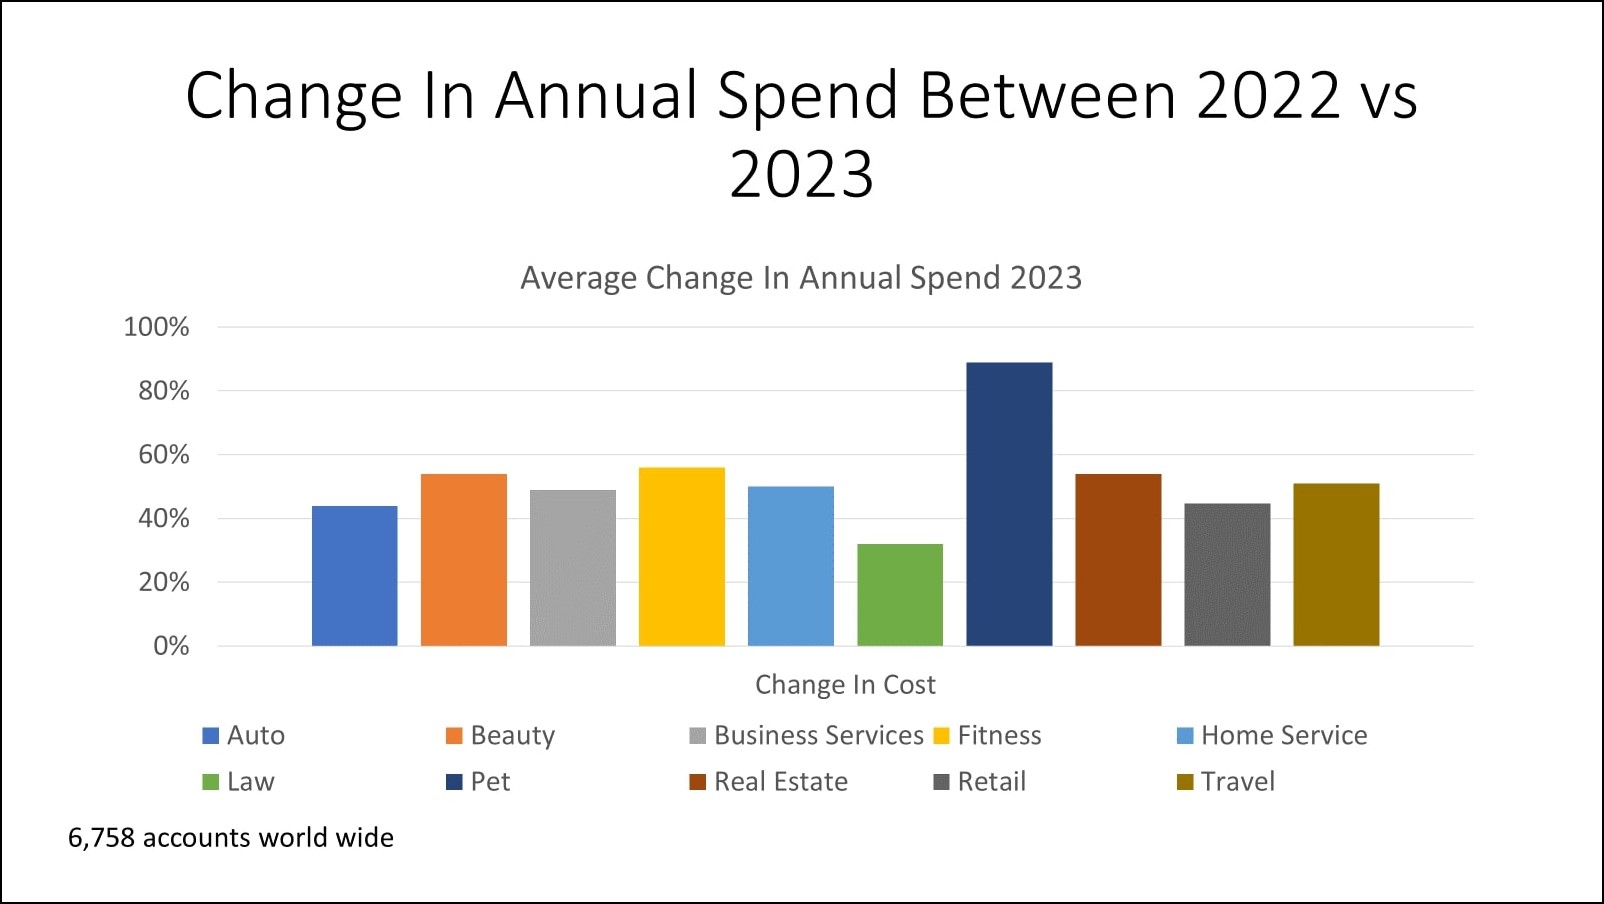 State of PPC - Image 5 - Change in annual spend between 2022 and 2023